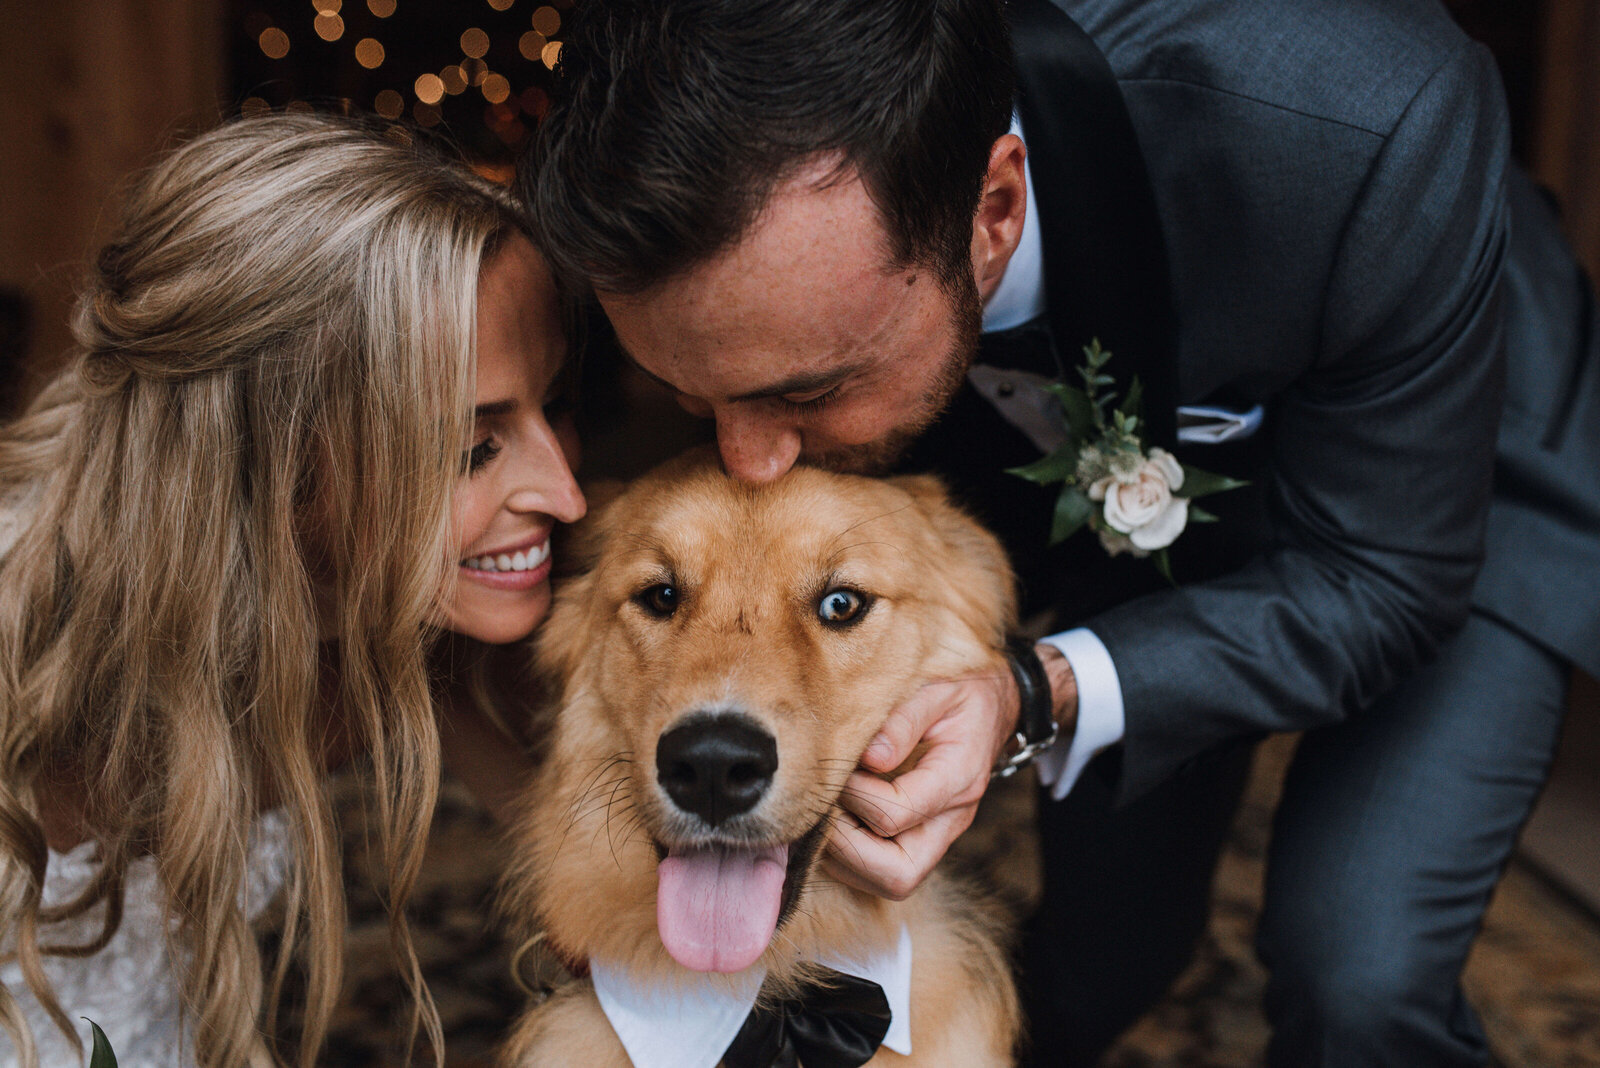 A bride and groom snuggle with their dog, who is wearing a tuxedo dog collar